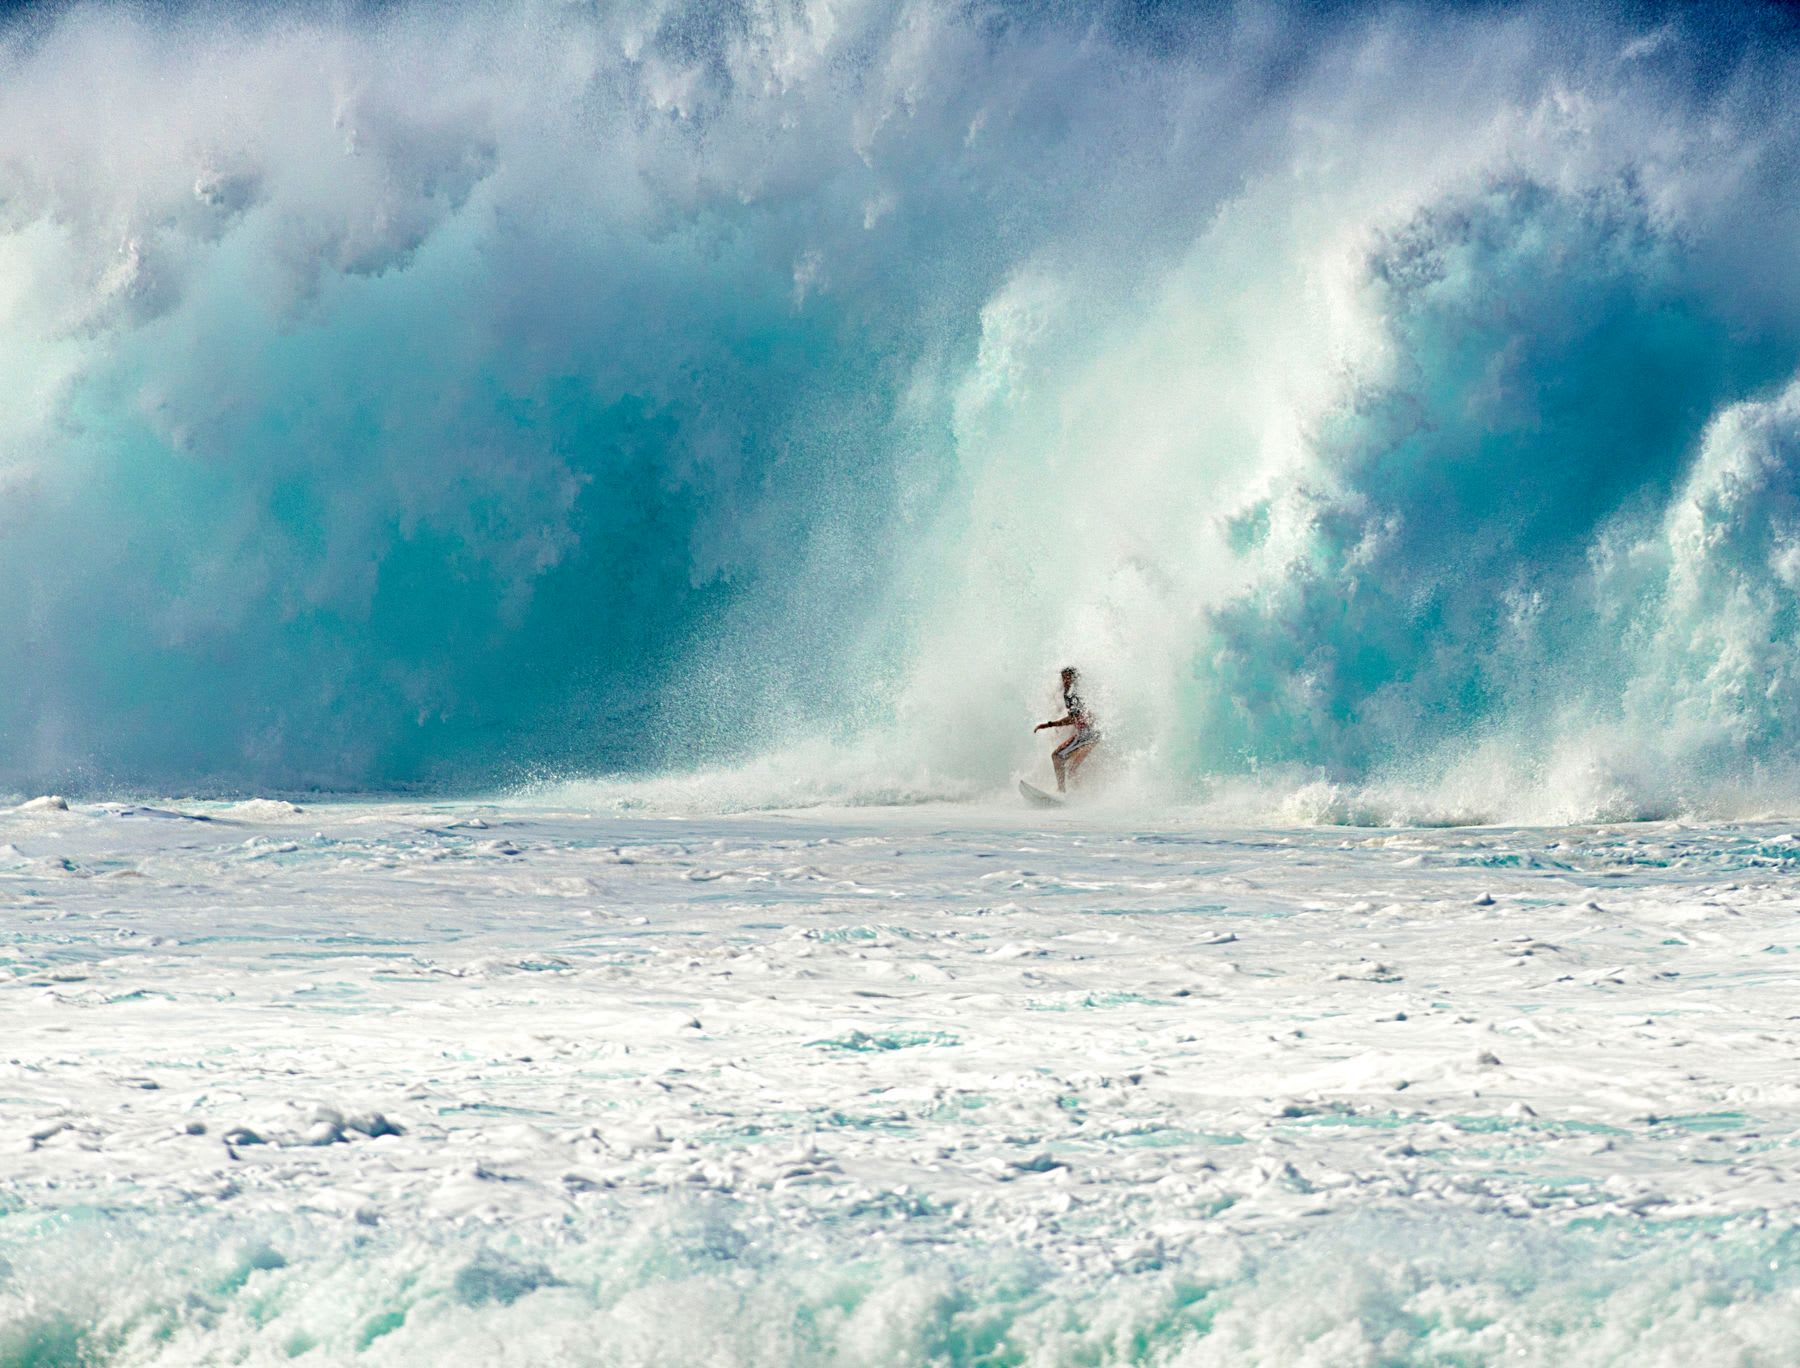 A surfer rides a massive wave in the ocean with water crashing around.